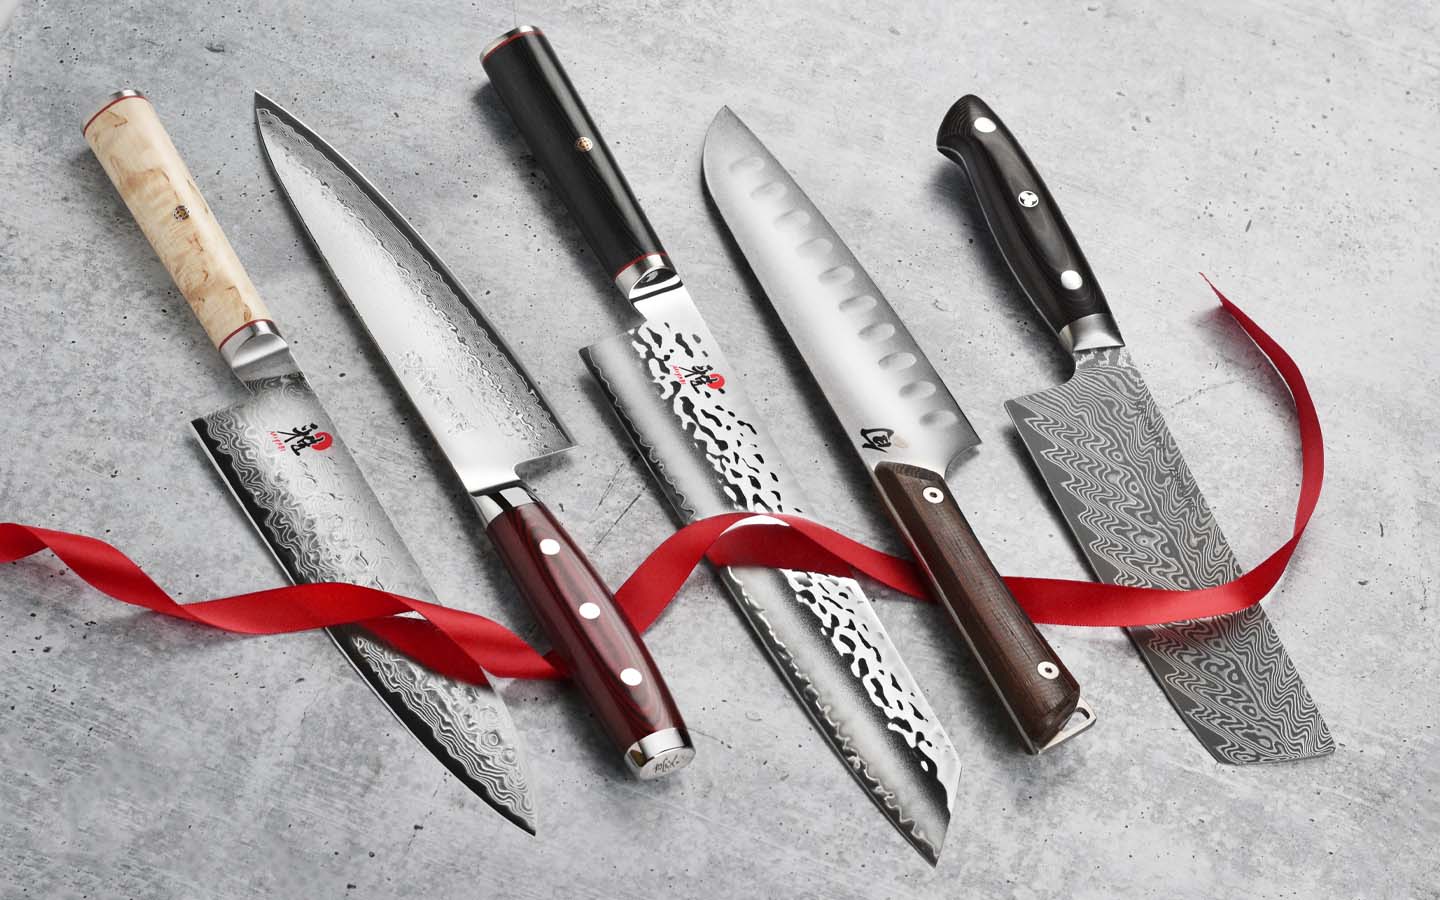 Zwilling J.A. Henckels Knives & Sets – Cutlery and More